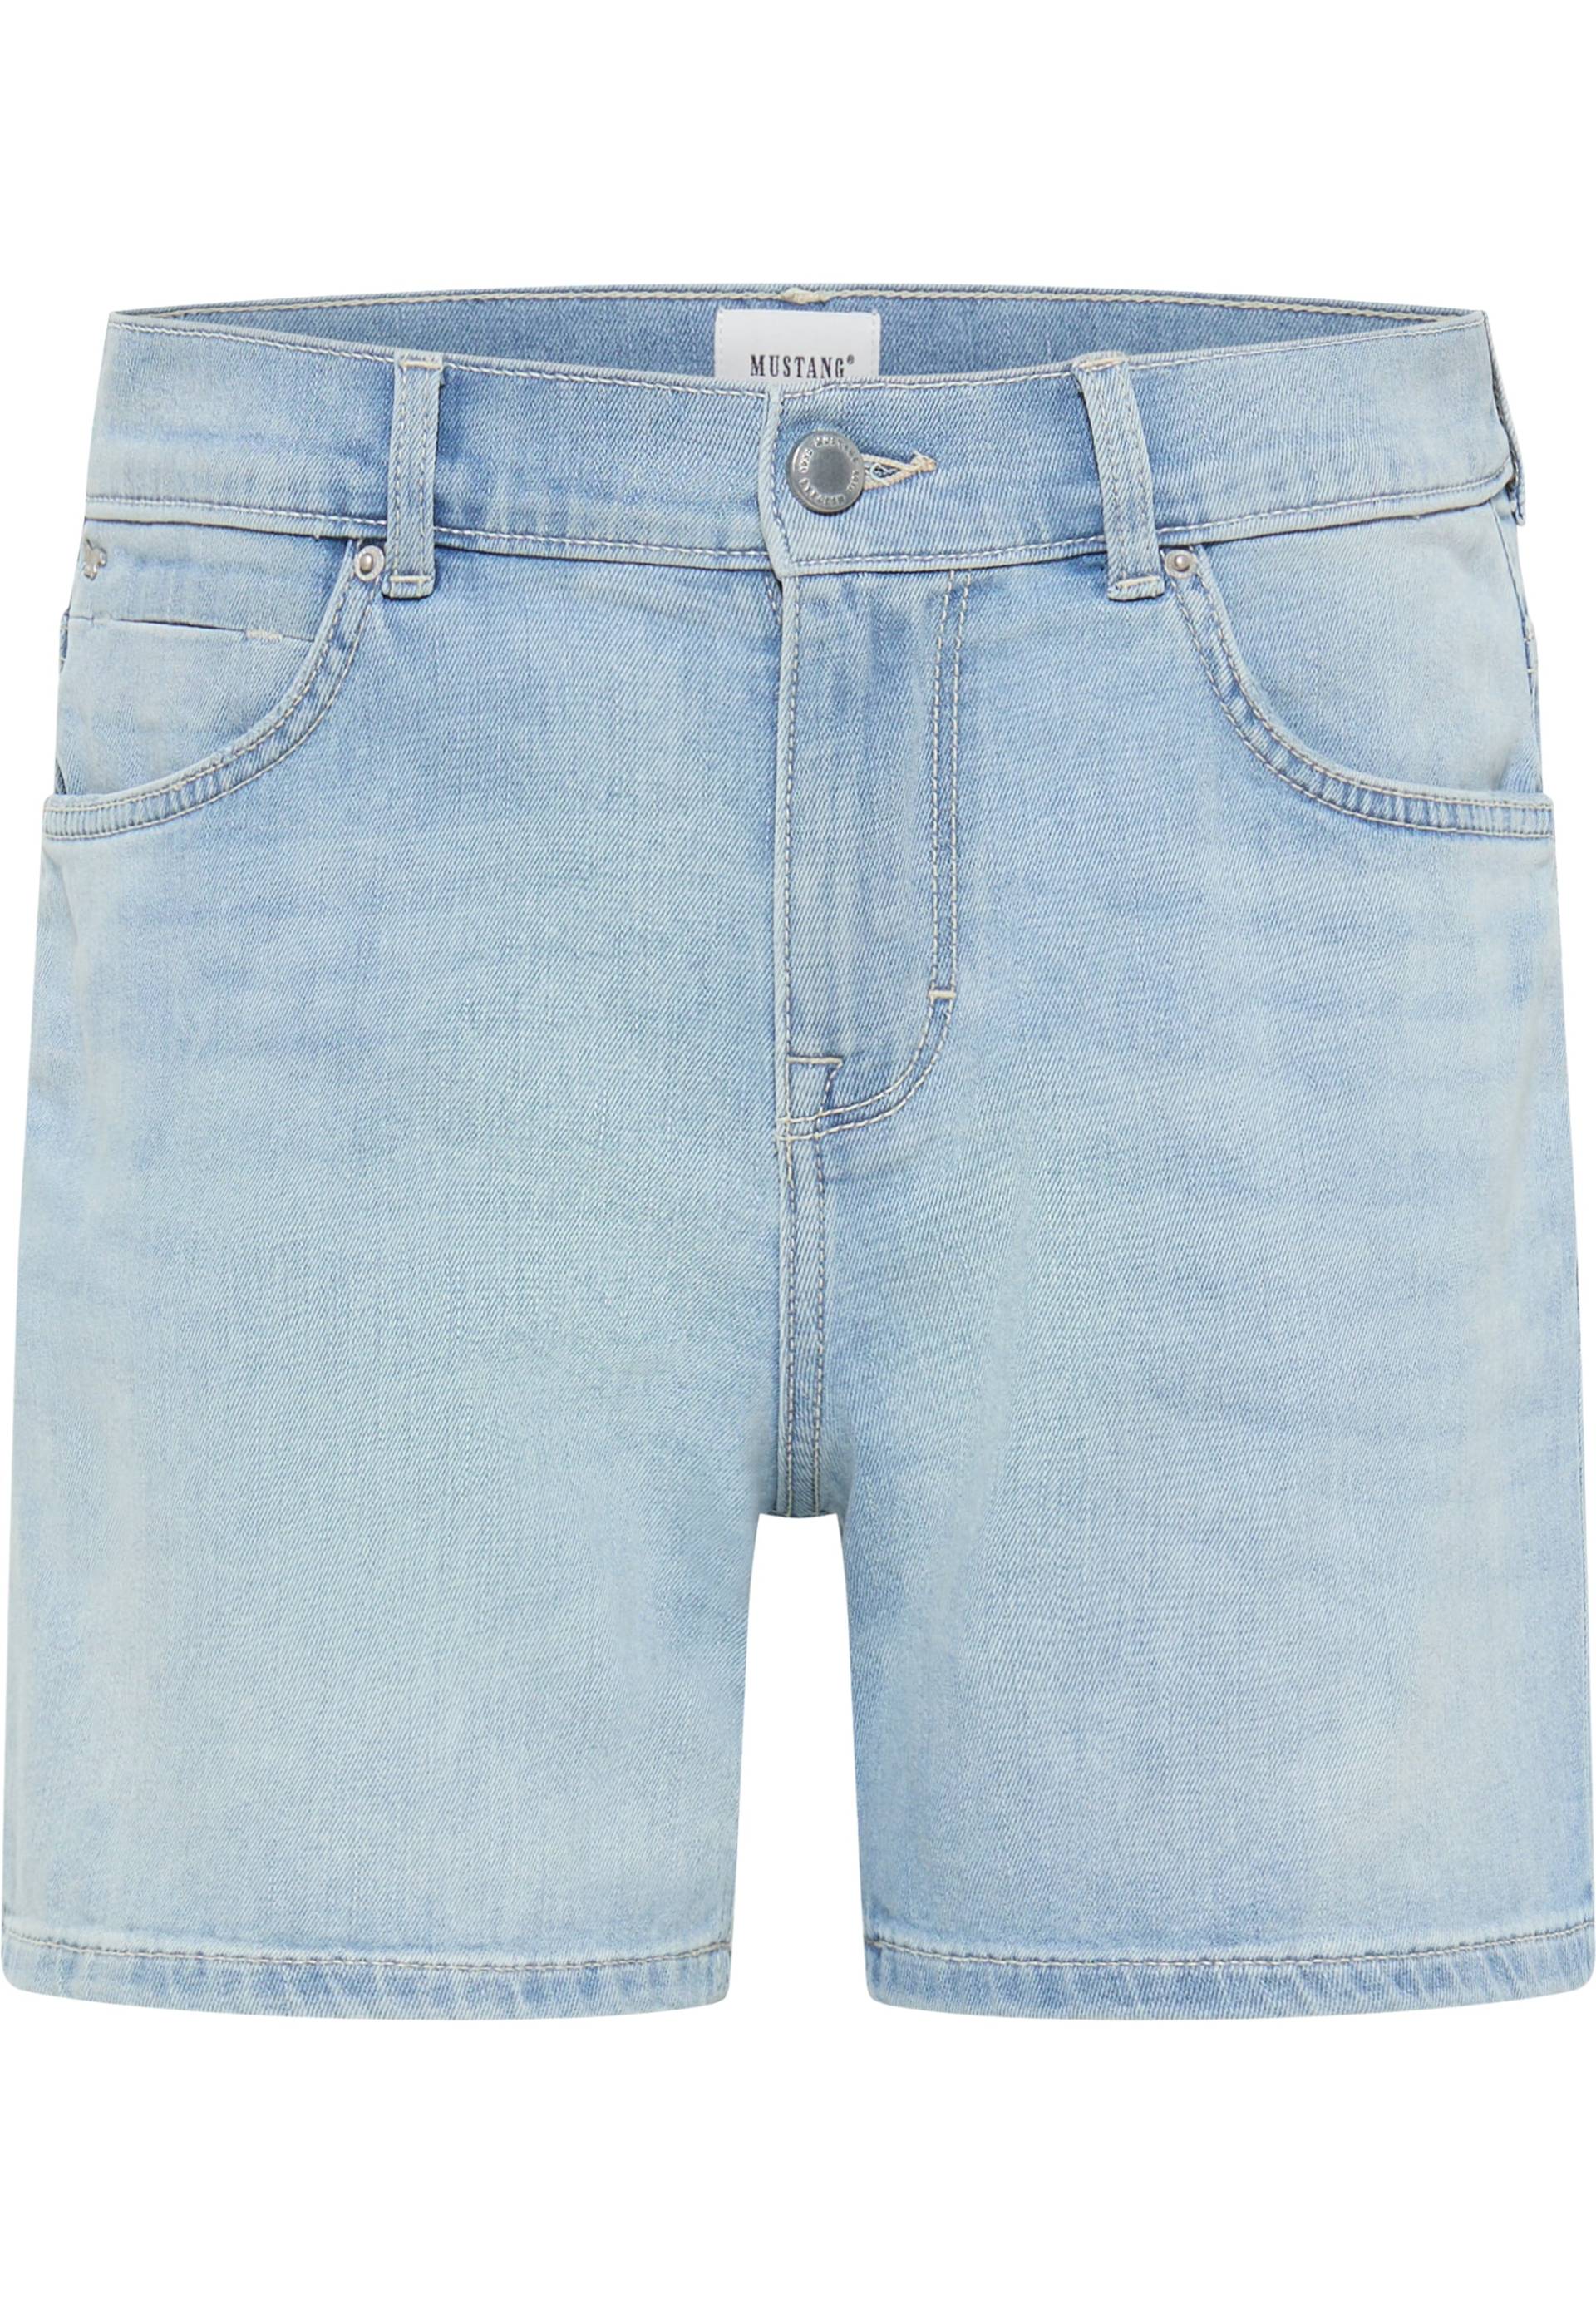 MUSTANG Shorts »Style Jodie Shorts« von Mustang